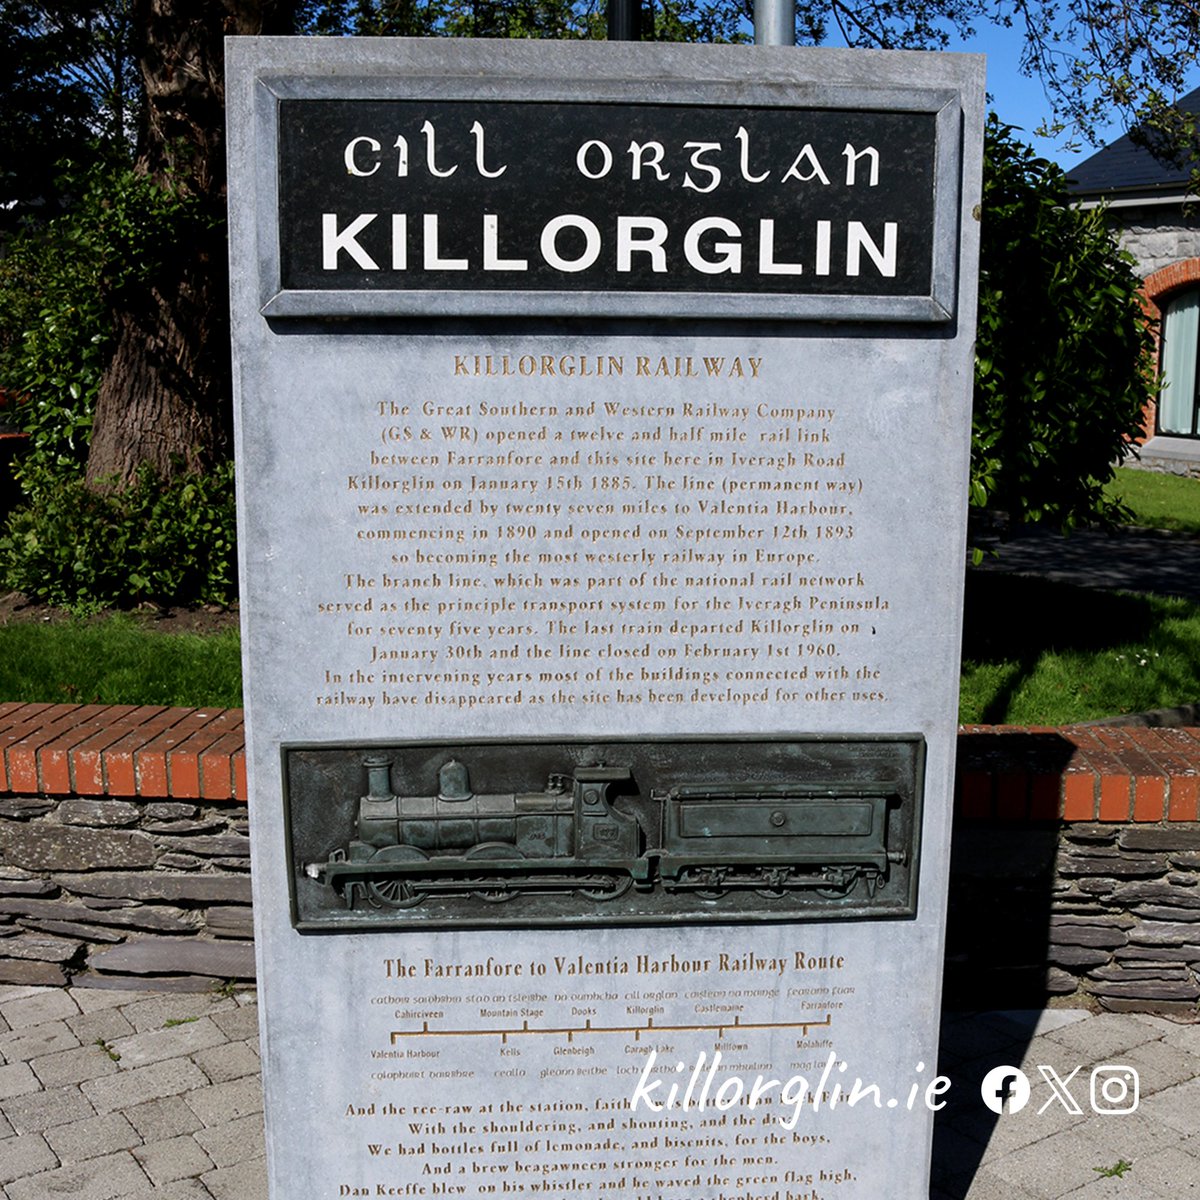 #Killorglin is rich in history... Learn more ➜ killorglin.ie/our-town/

#LivePlayThriveHere